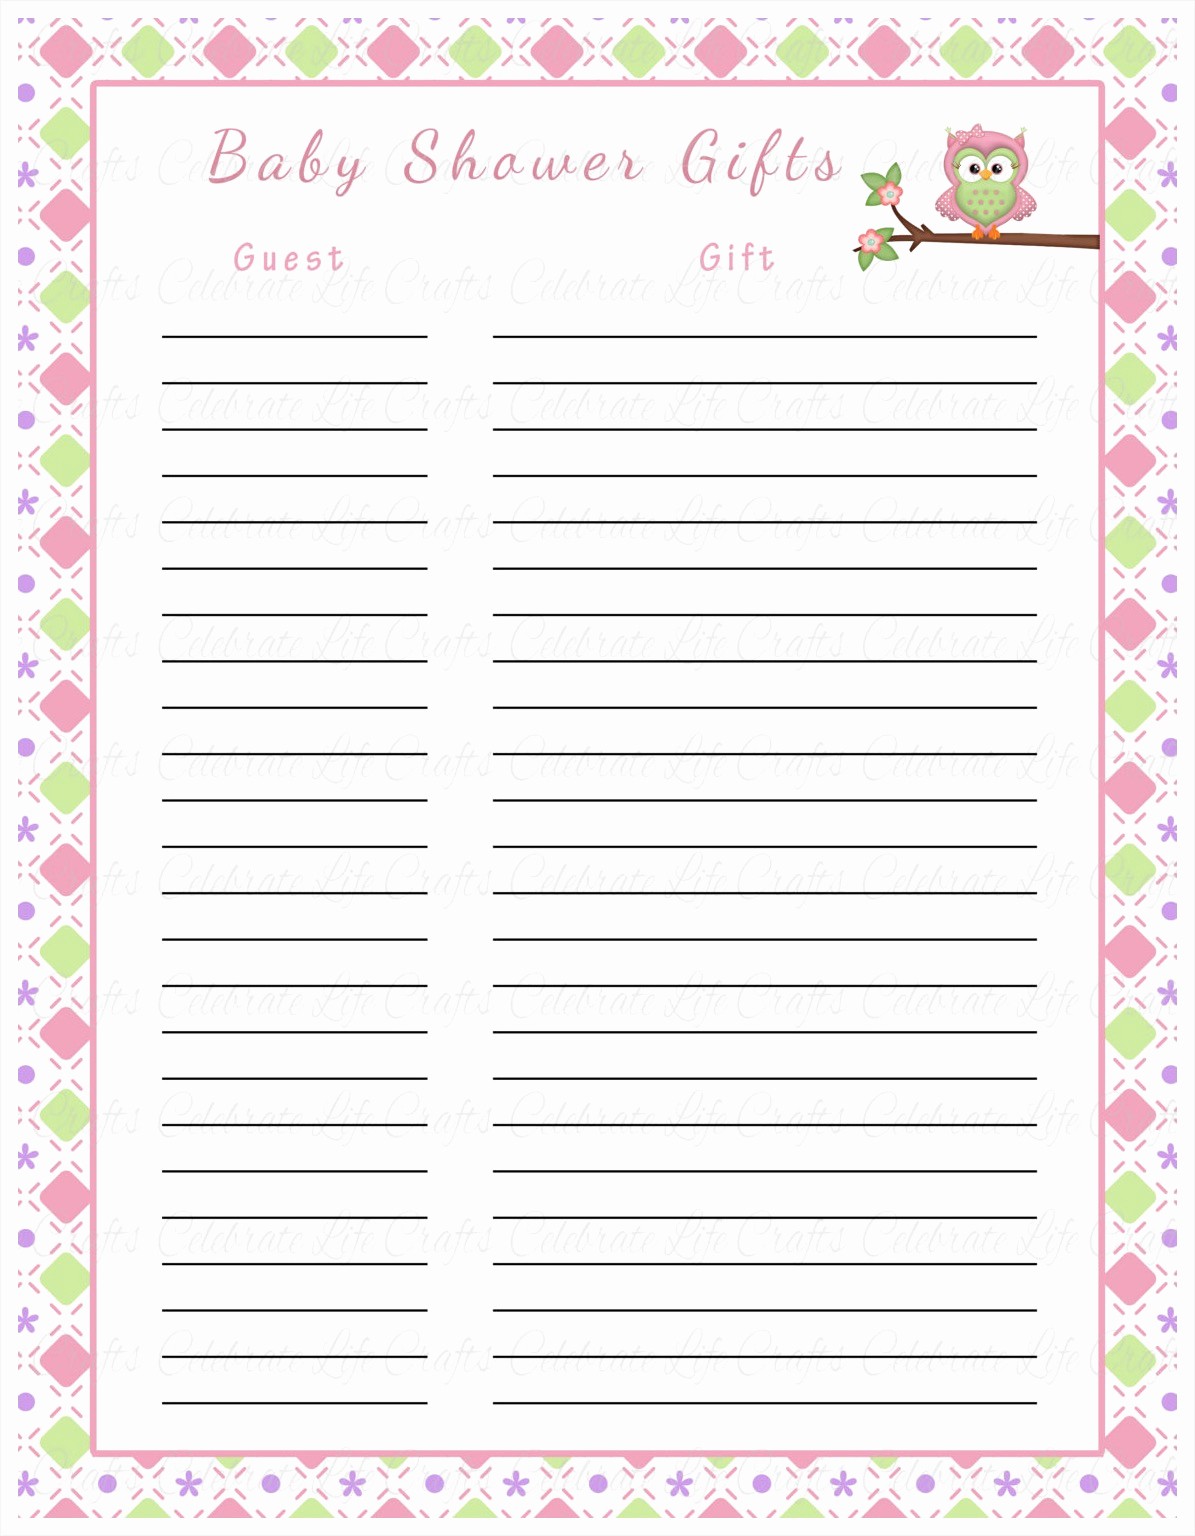 Baby Shower Invitation List Template New Baby Shower Guest List Template Mughals